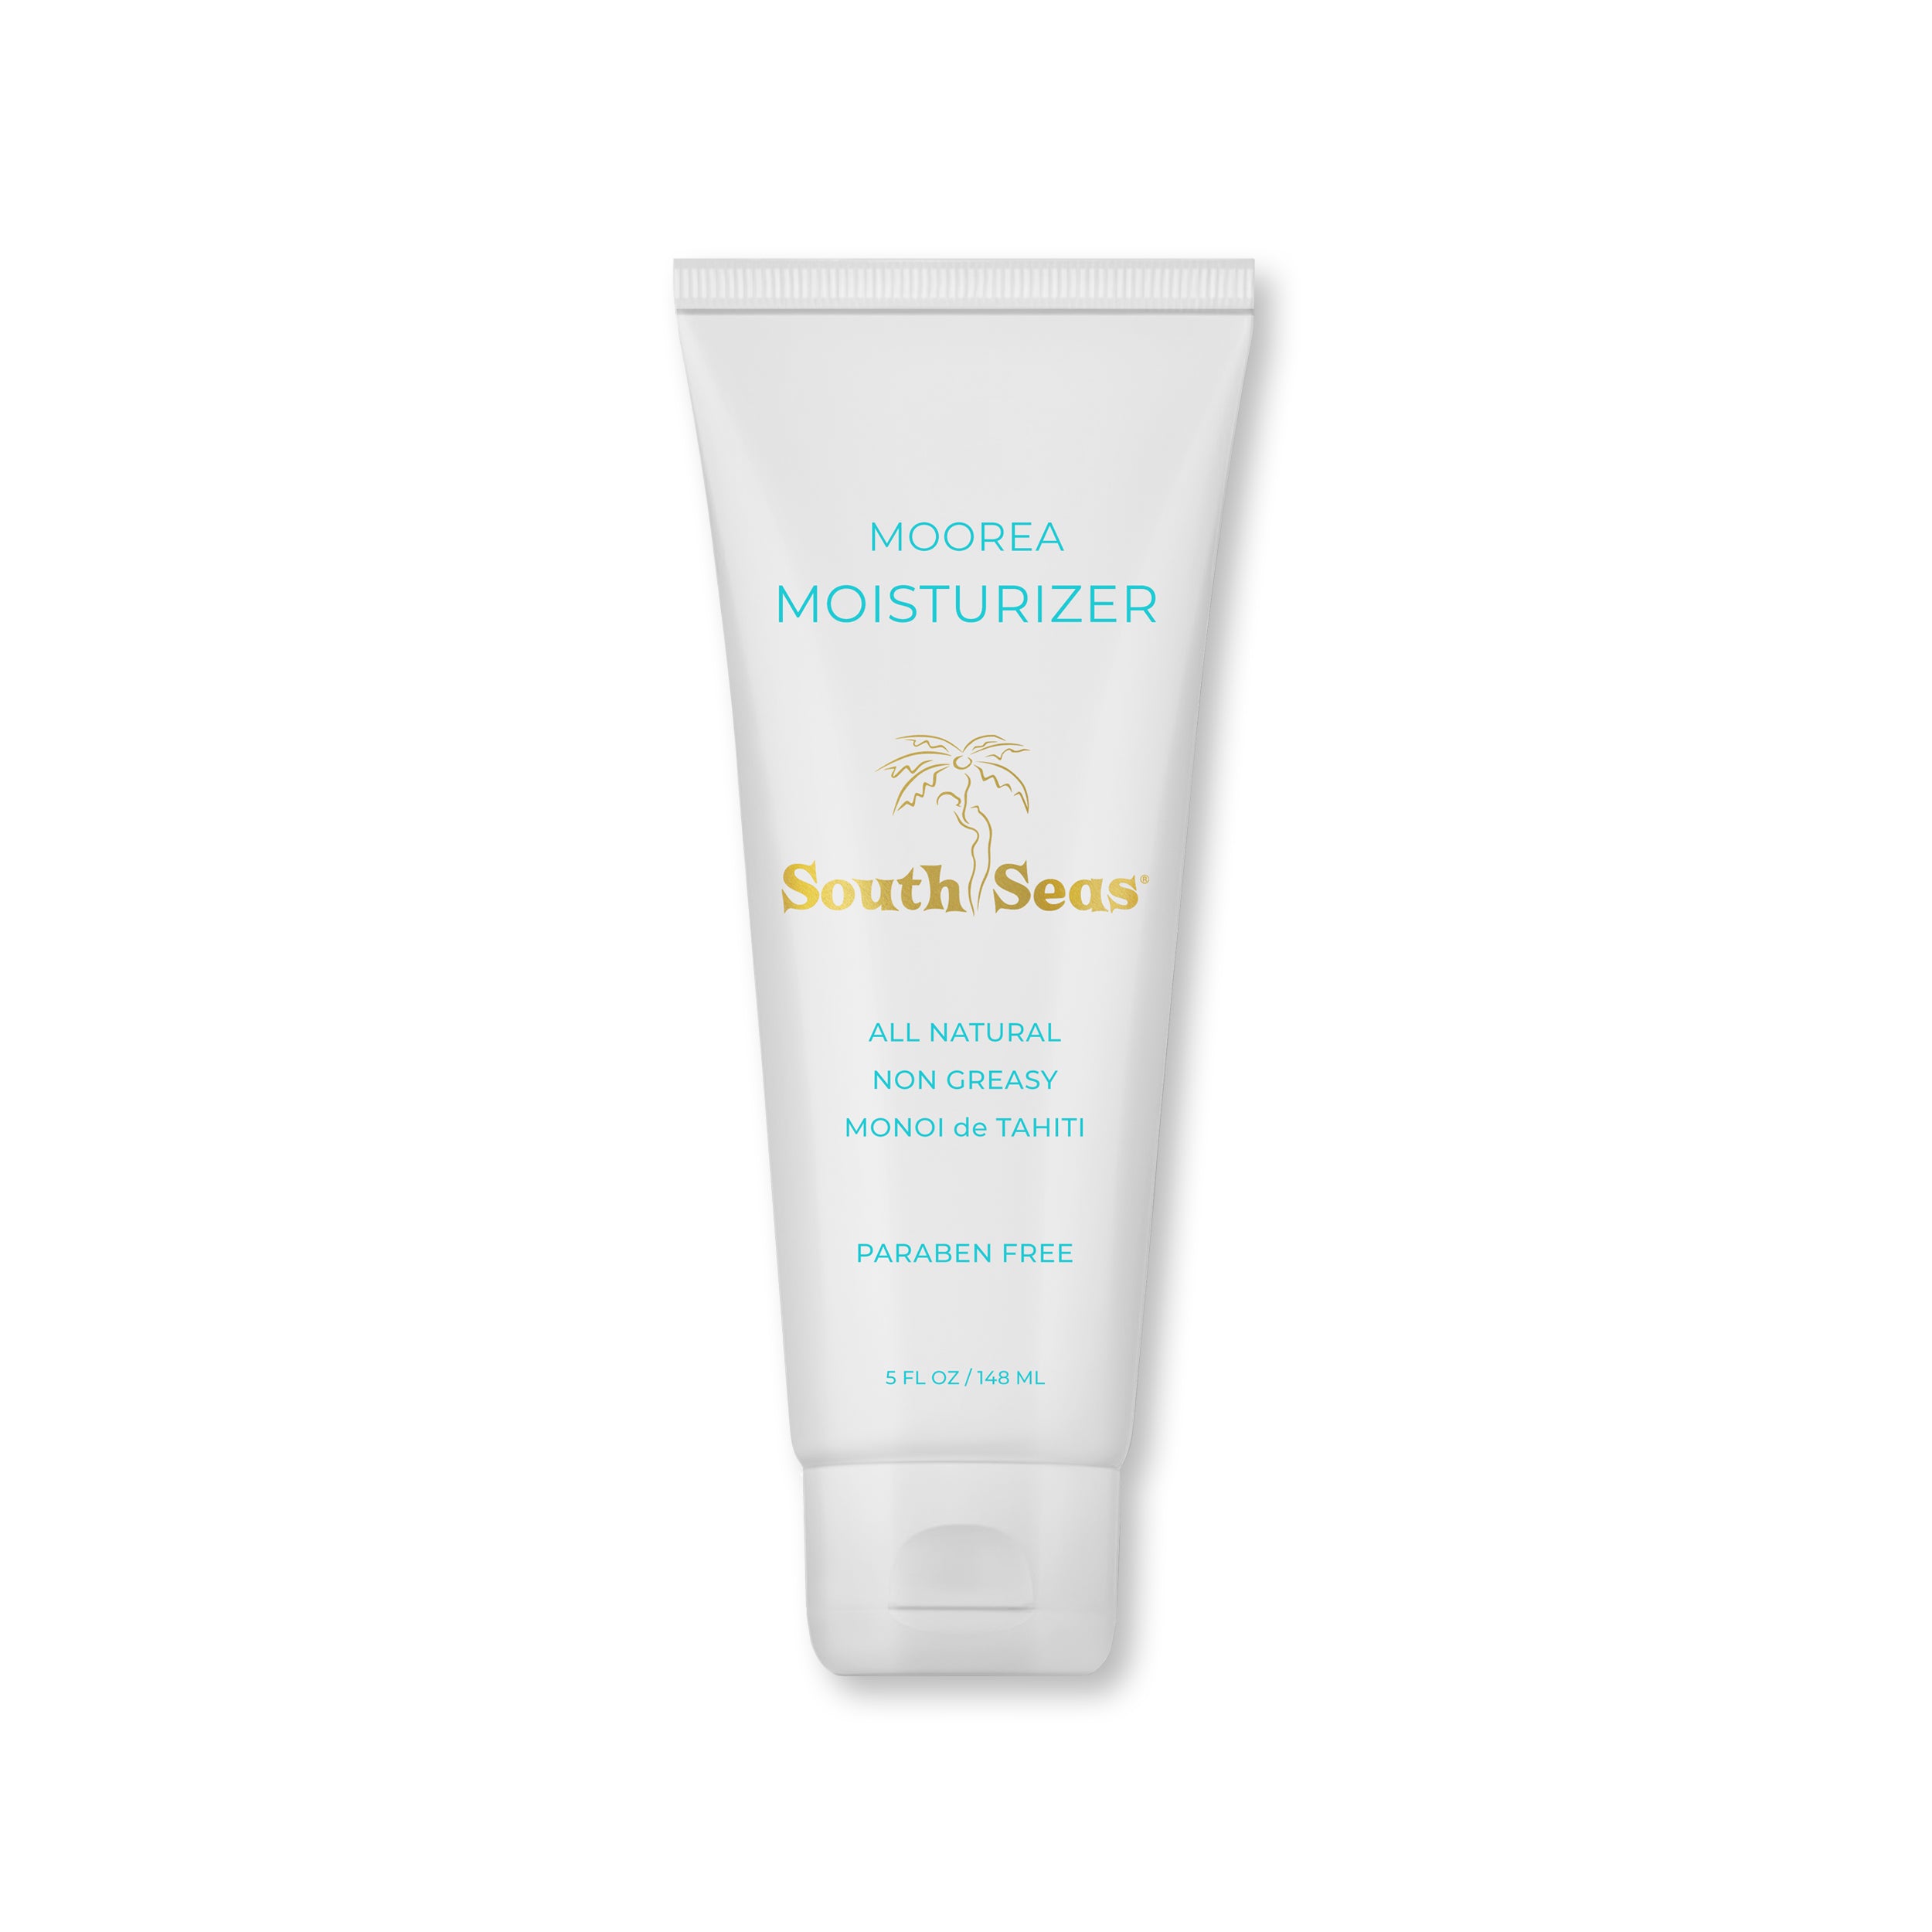 Moorea Moisturizer. All natural, non-greasy, infused with Monoi de Tahiti. Perfect body lotion for every day use.